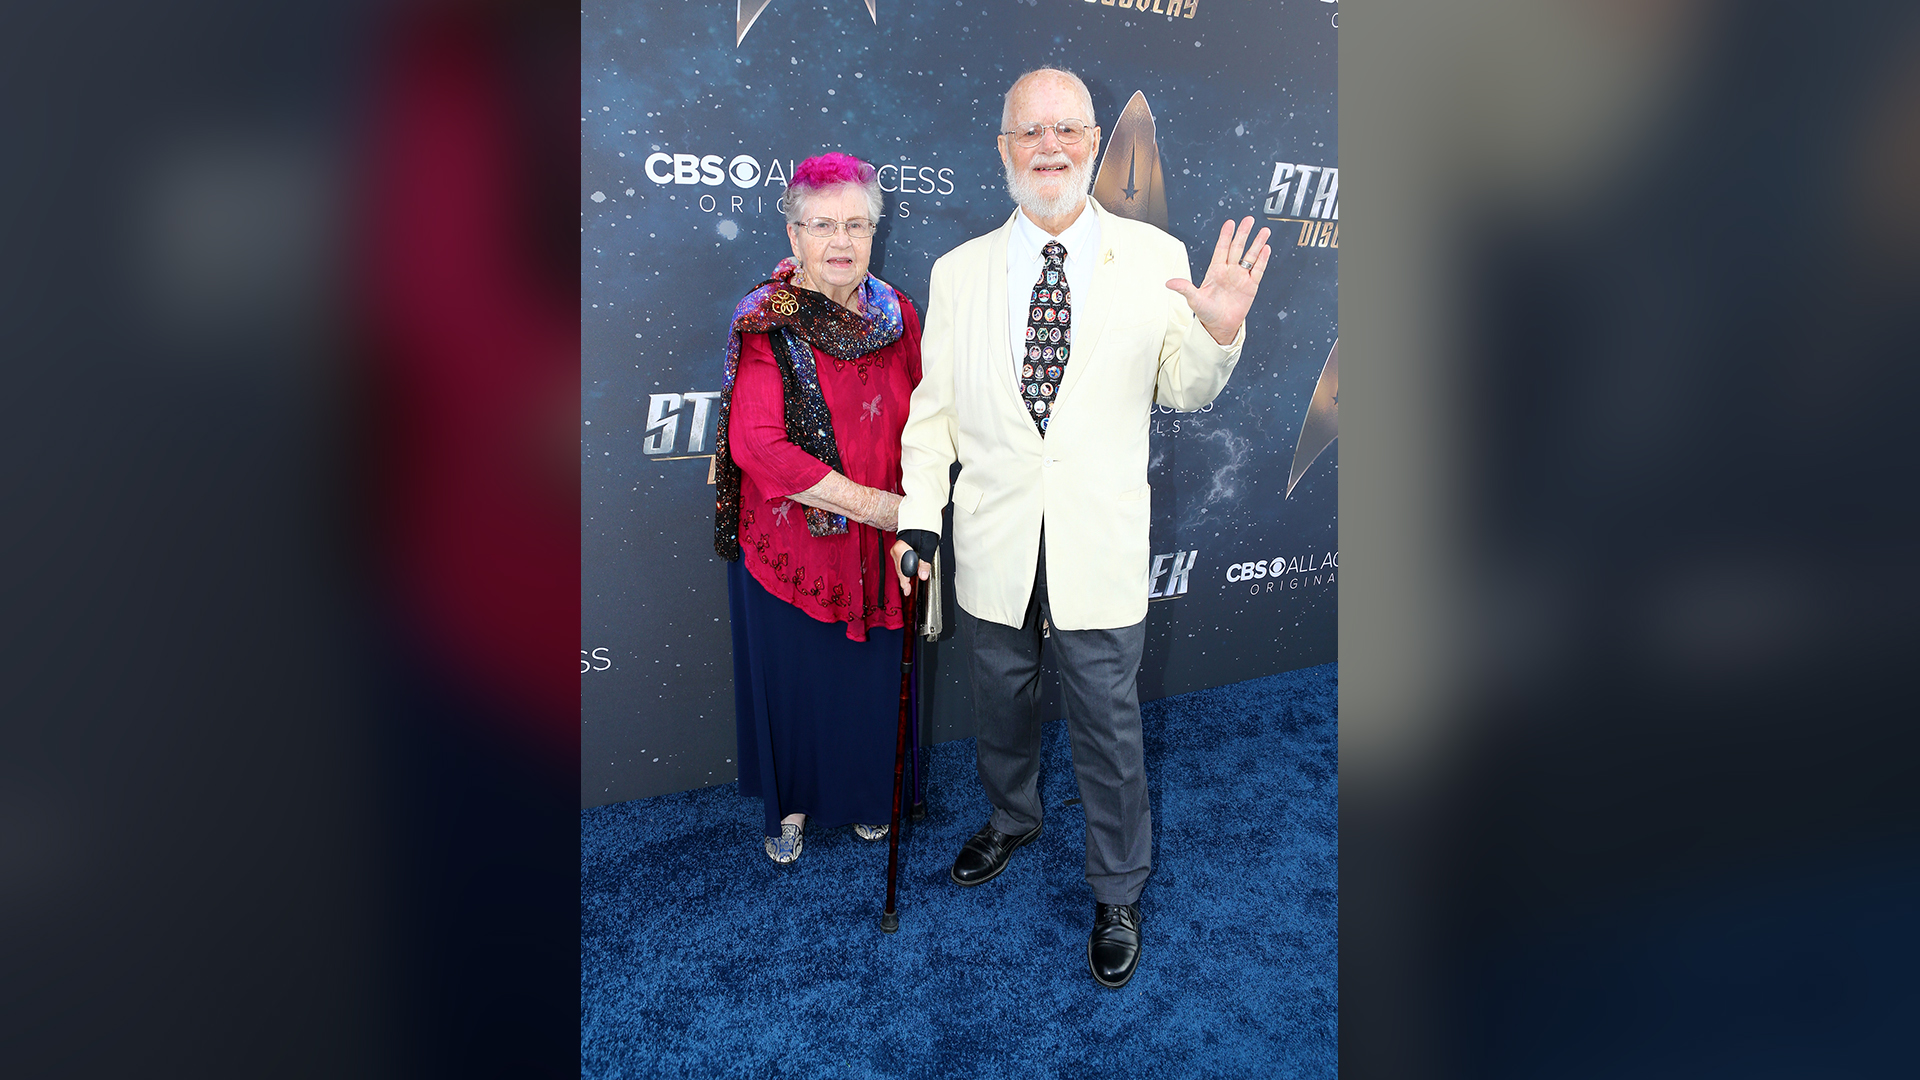 Bjo and John Trimble, the fans who helped save the original Star Trek